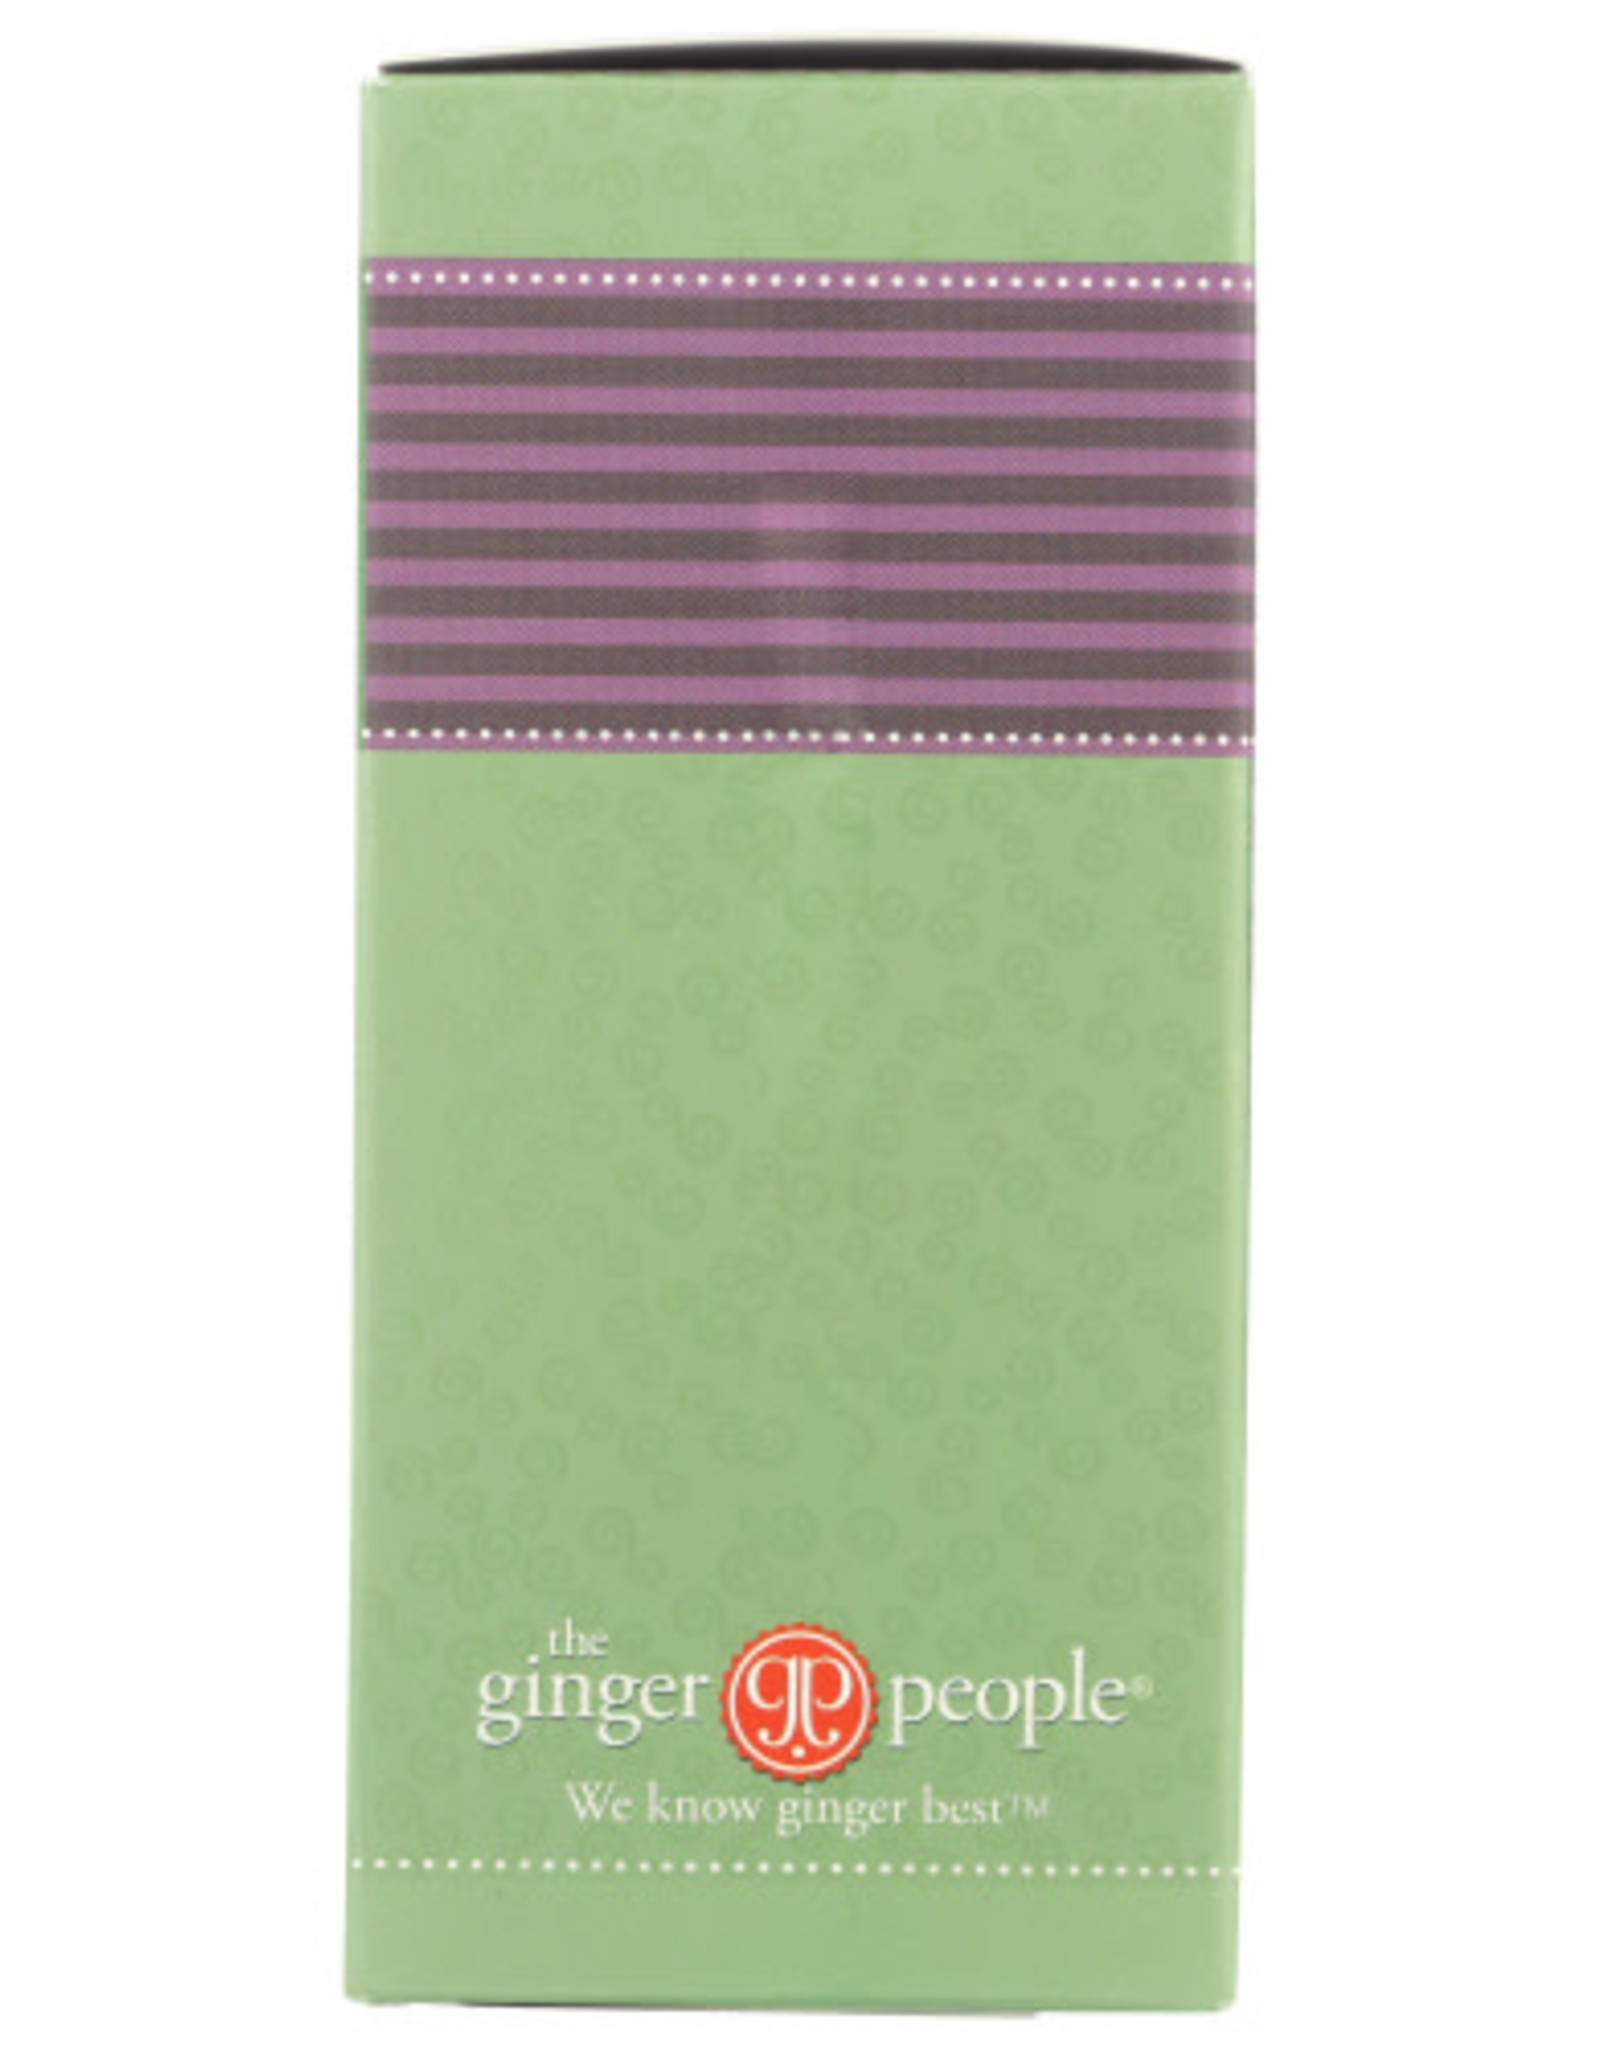 THE GINGER PEOPLE® THE GINGER PEOPLE GIN GINS ORIGINAL CHEWY GINGER CANDY BOX, 4.5 OZ.